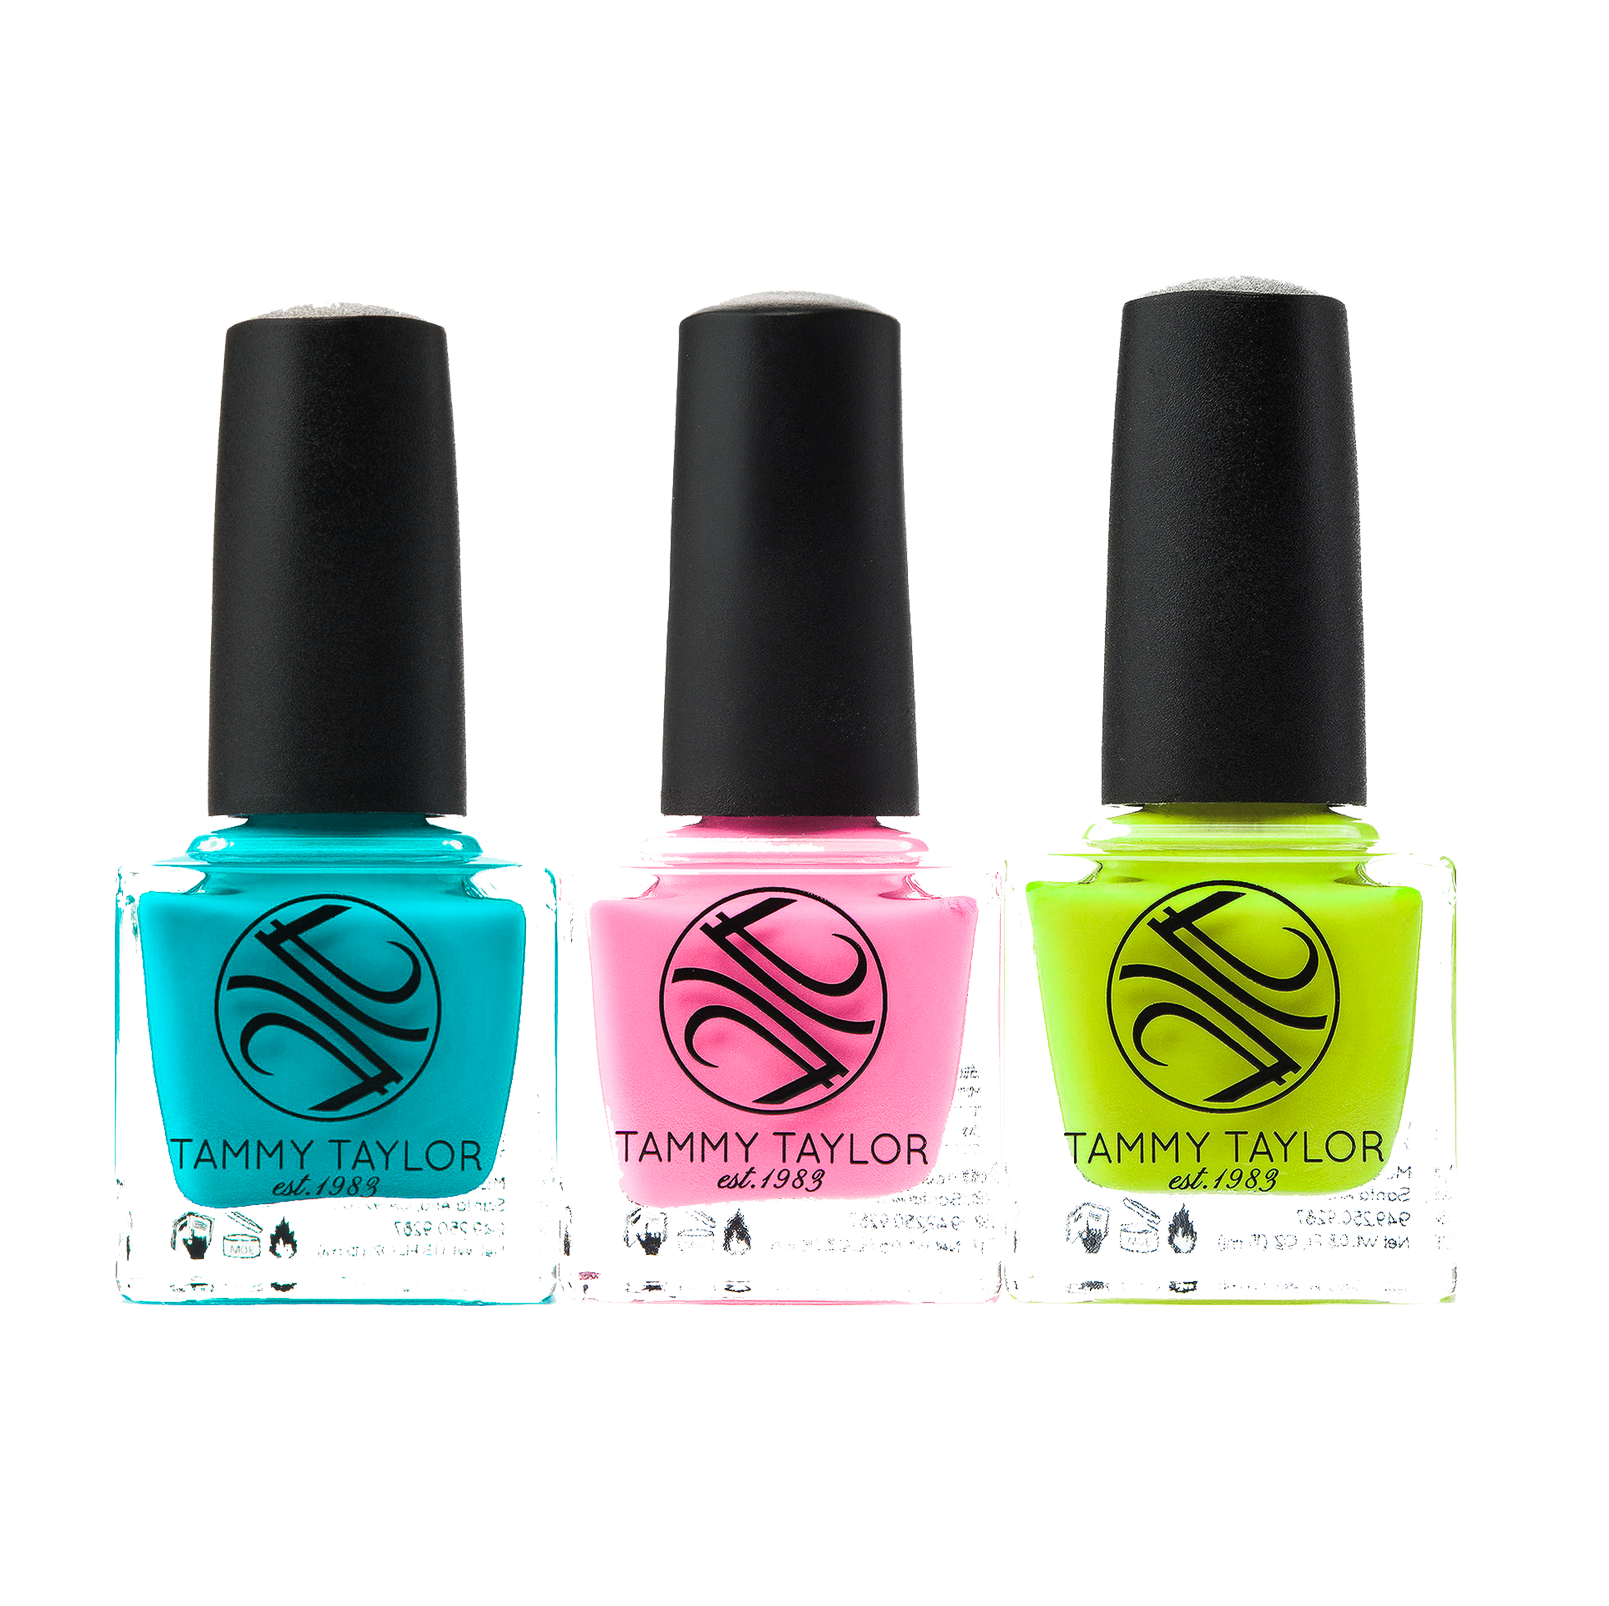 Lost In Paradise Nail Lacquer Bundle